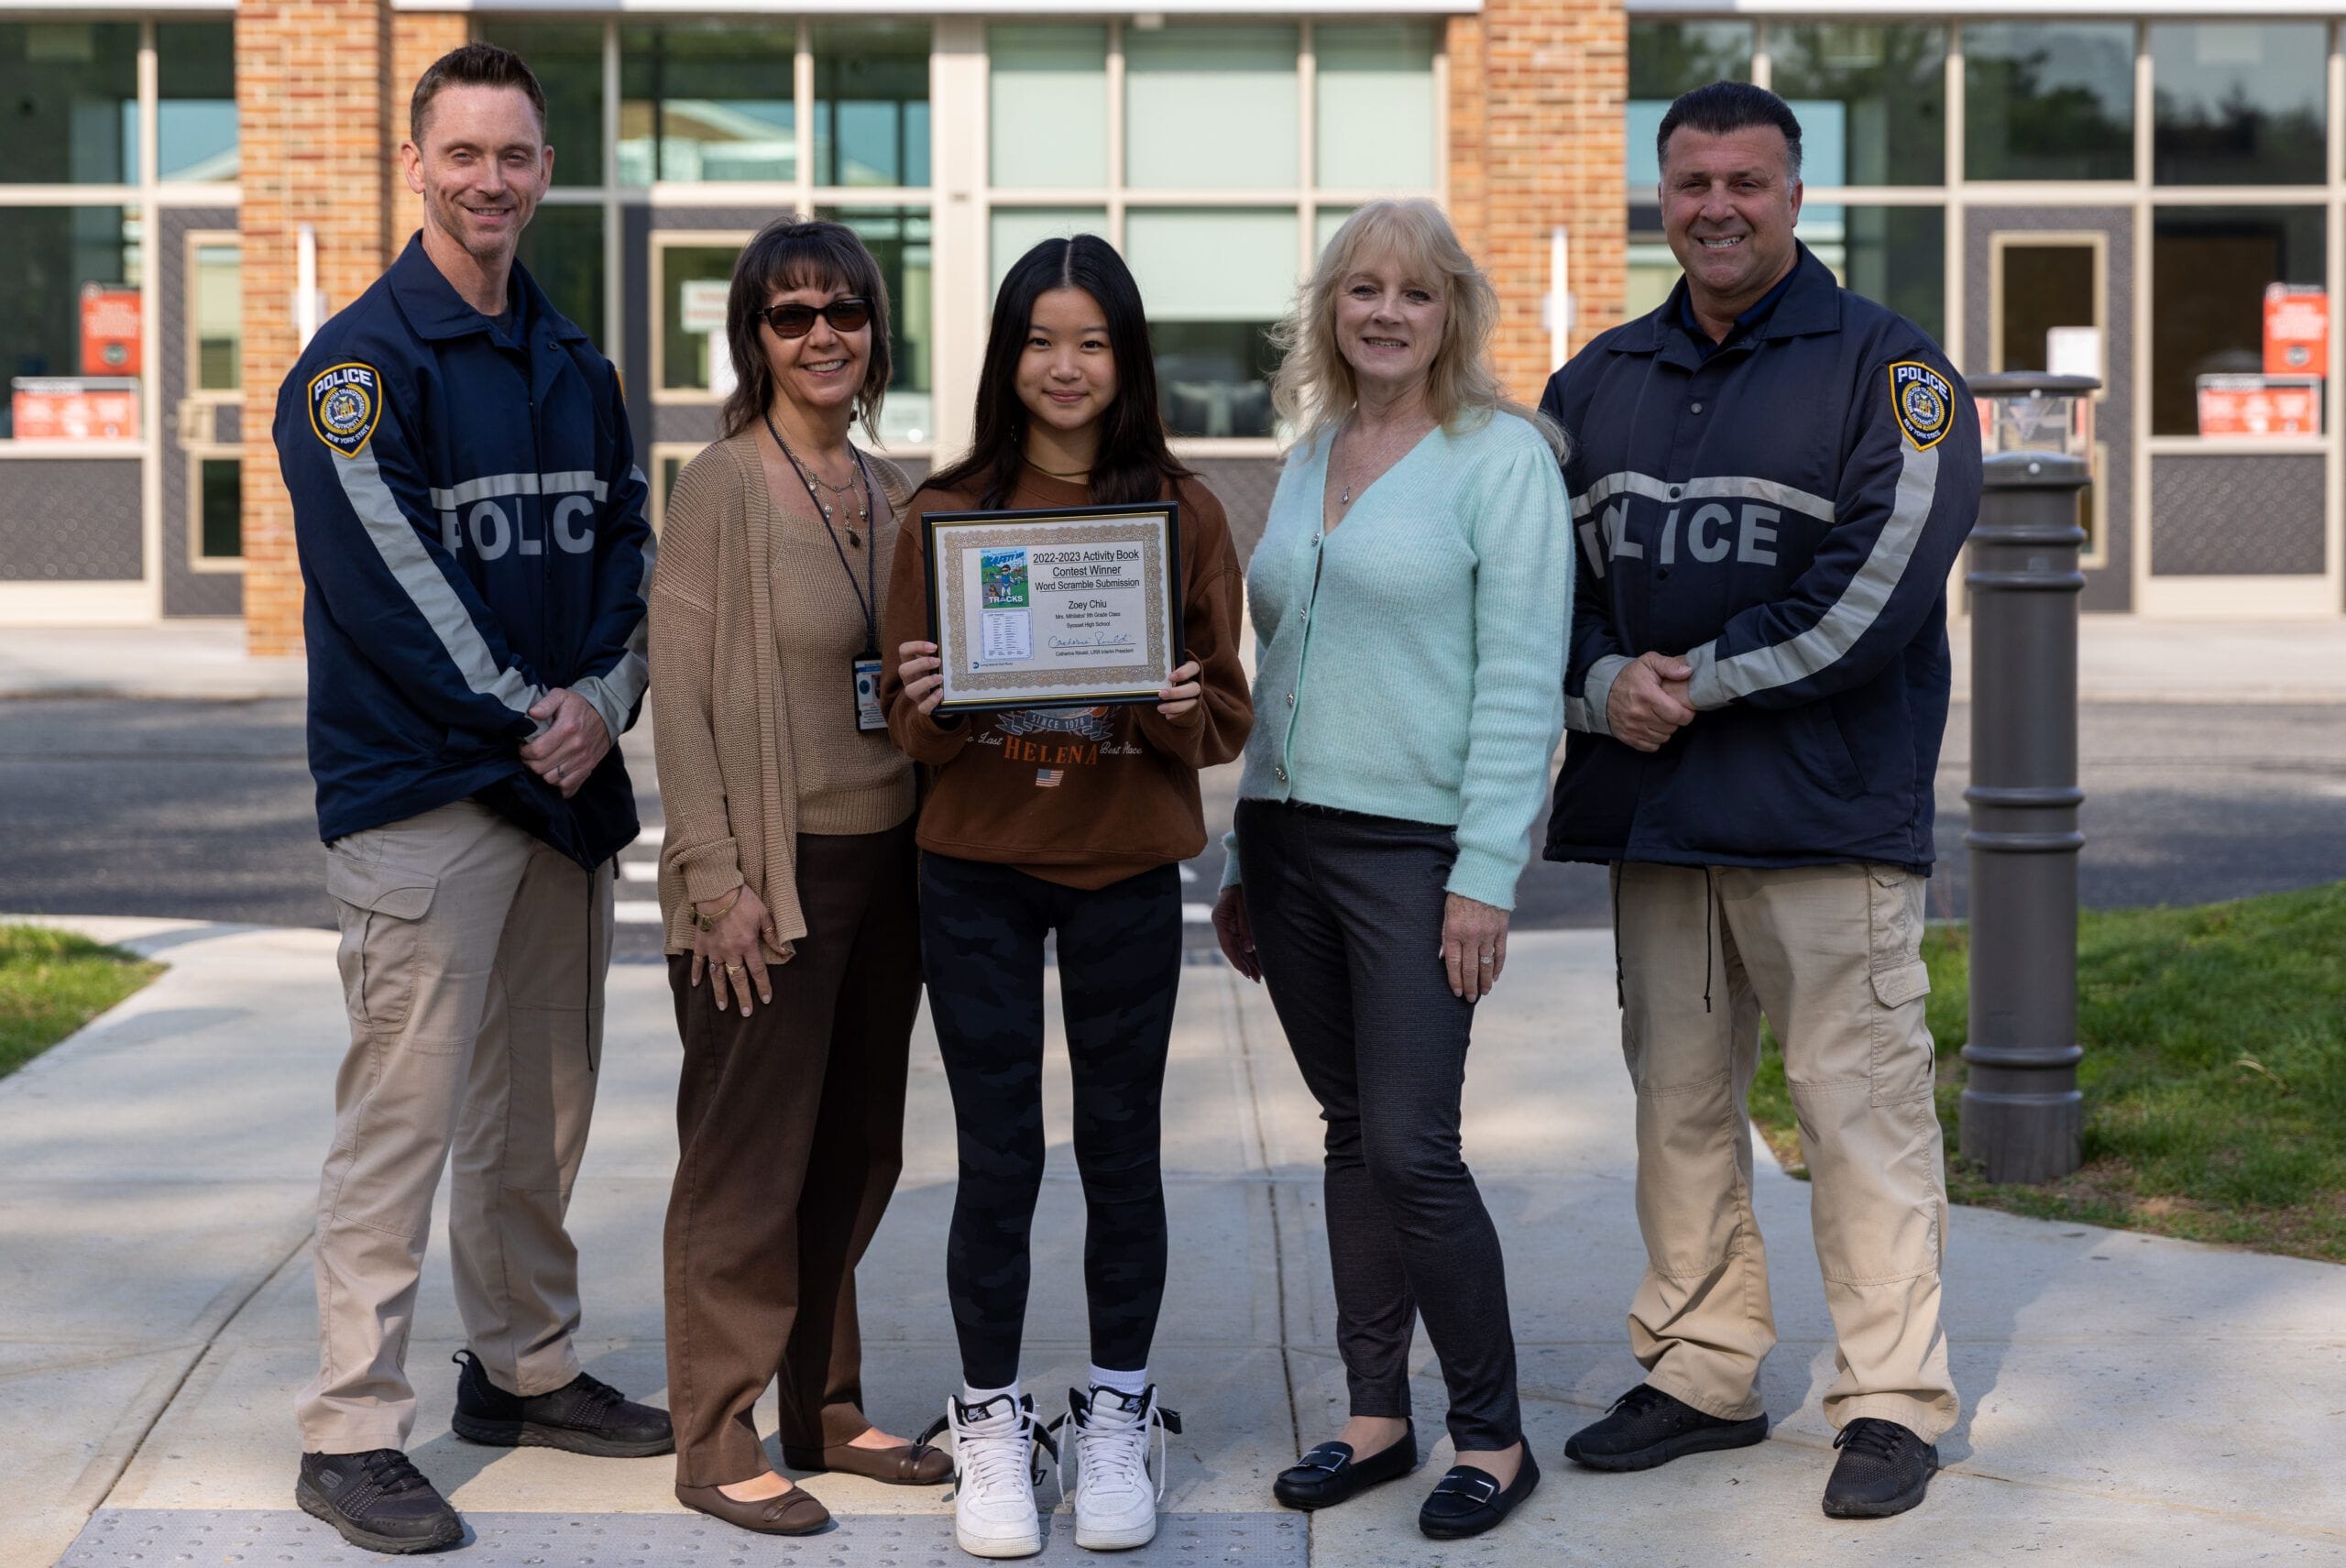 Syosset Students Win LIRR T.R.A.C.K.S. Activity Book Contest